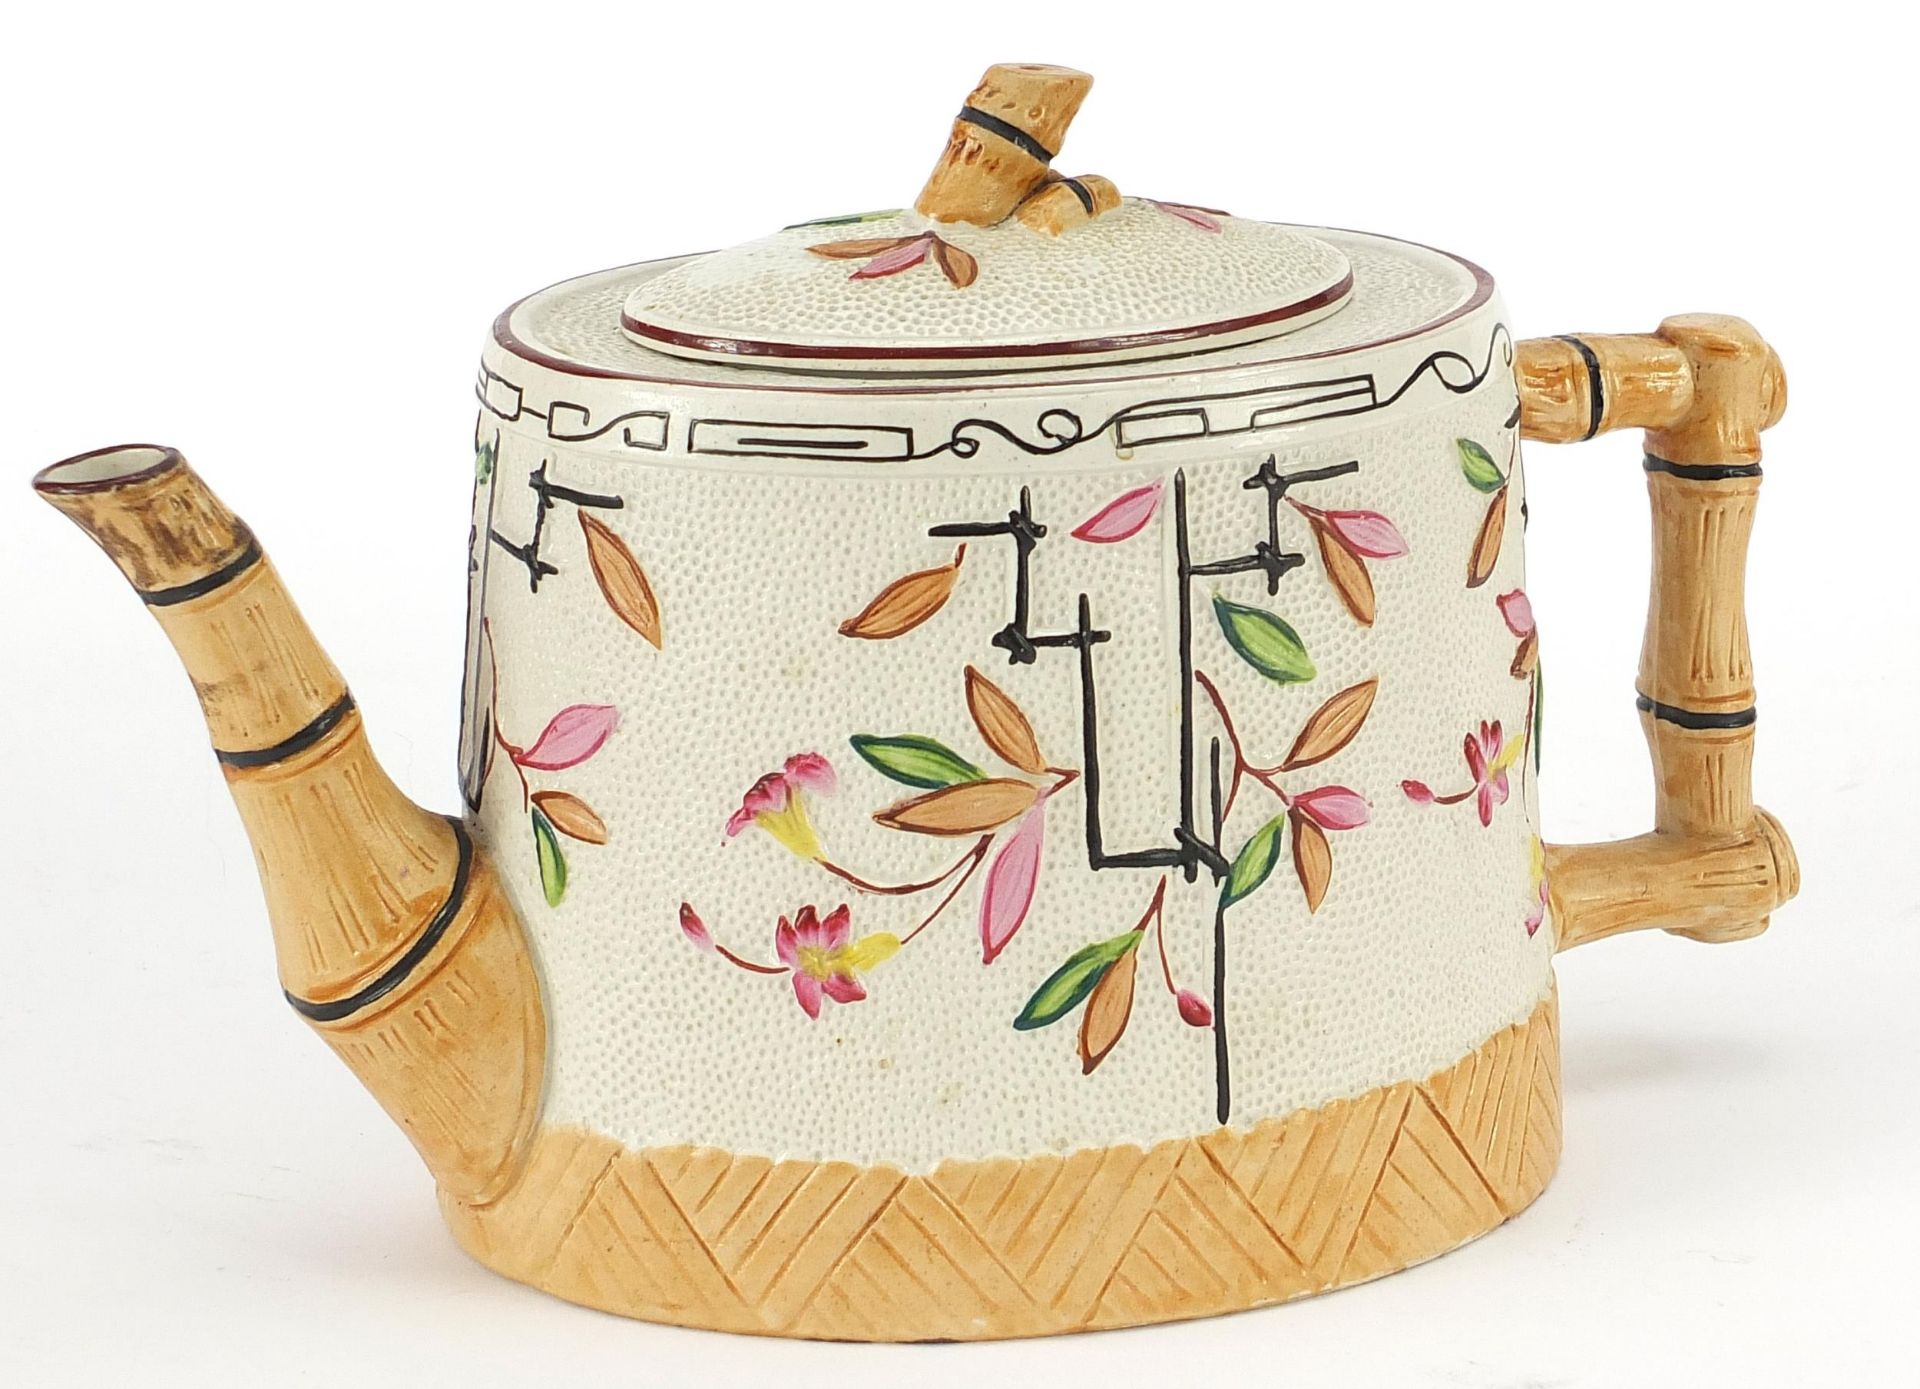 Christopher Dresser style aesthetic teapot, registration number to the base, the side decorated with